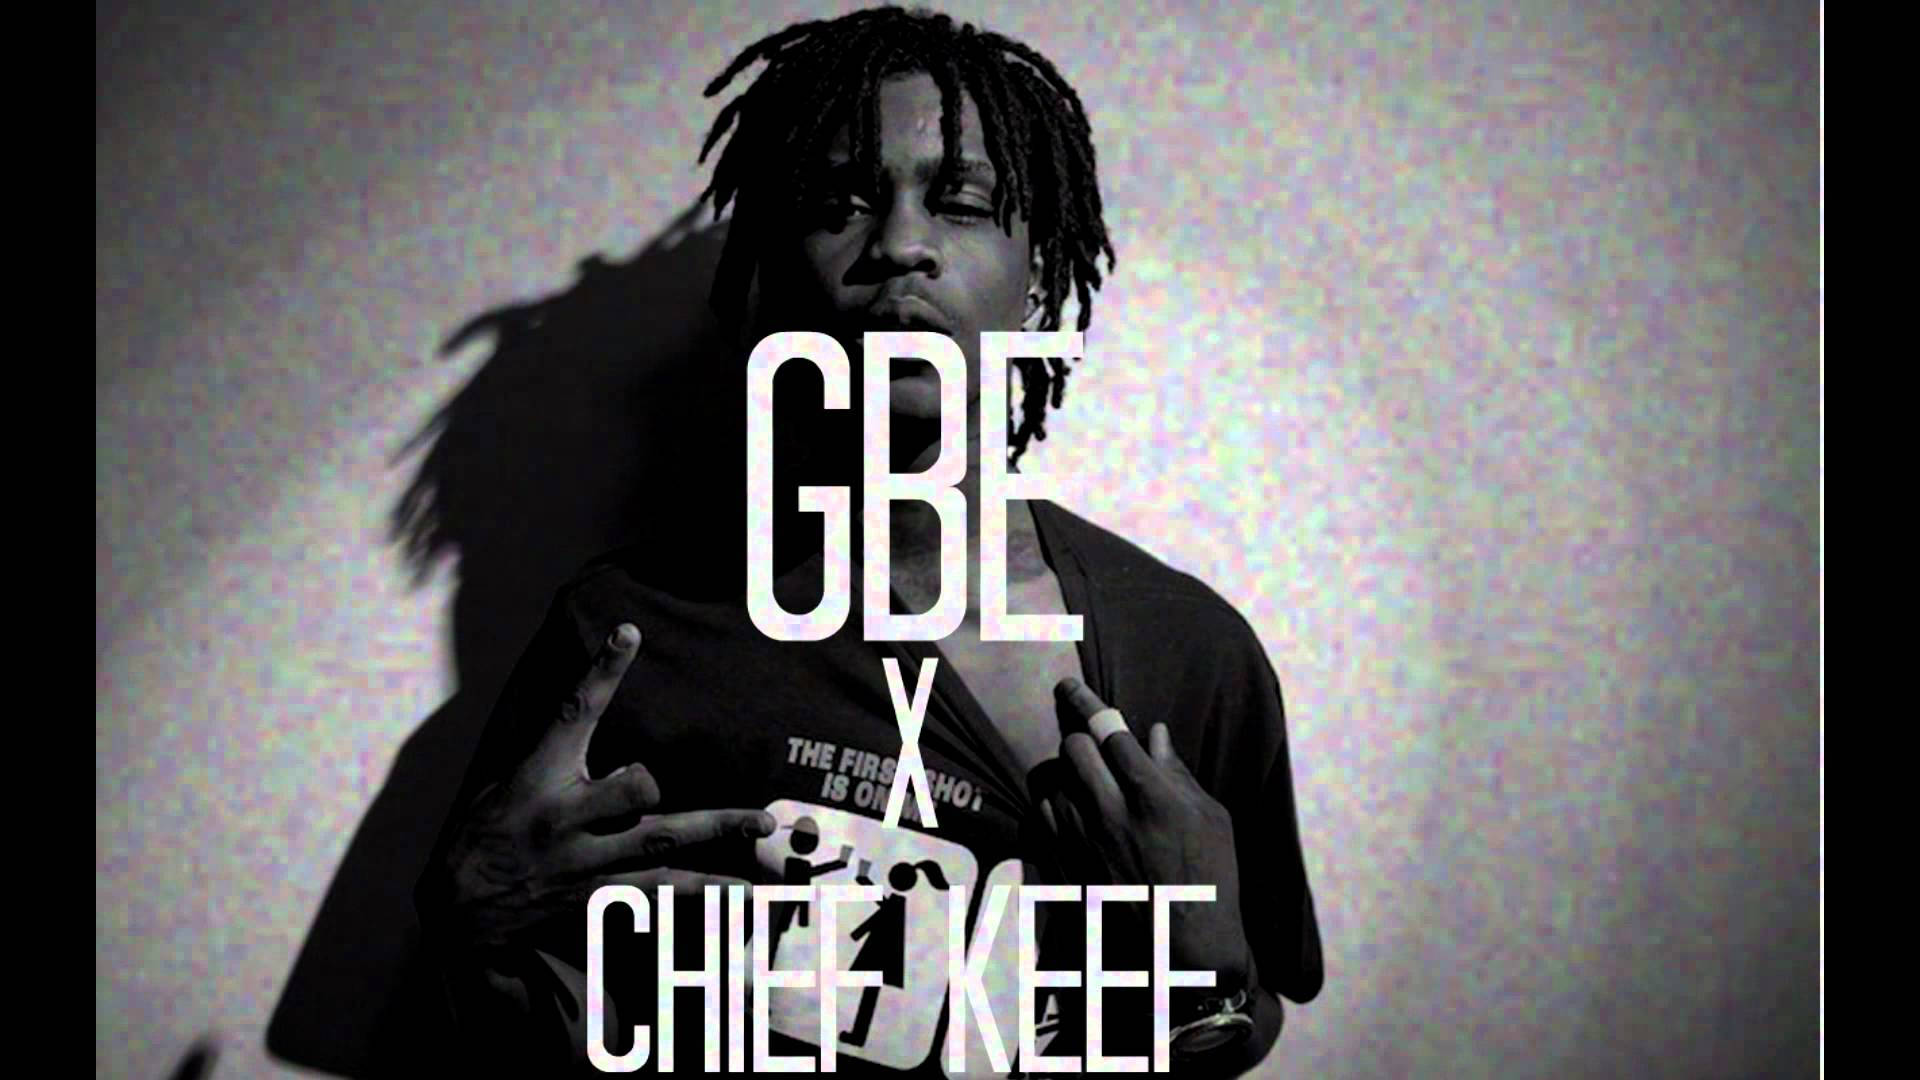 Chief Keef X GBE Monochrome Poster Wallpaper